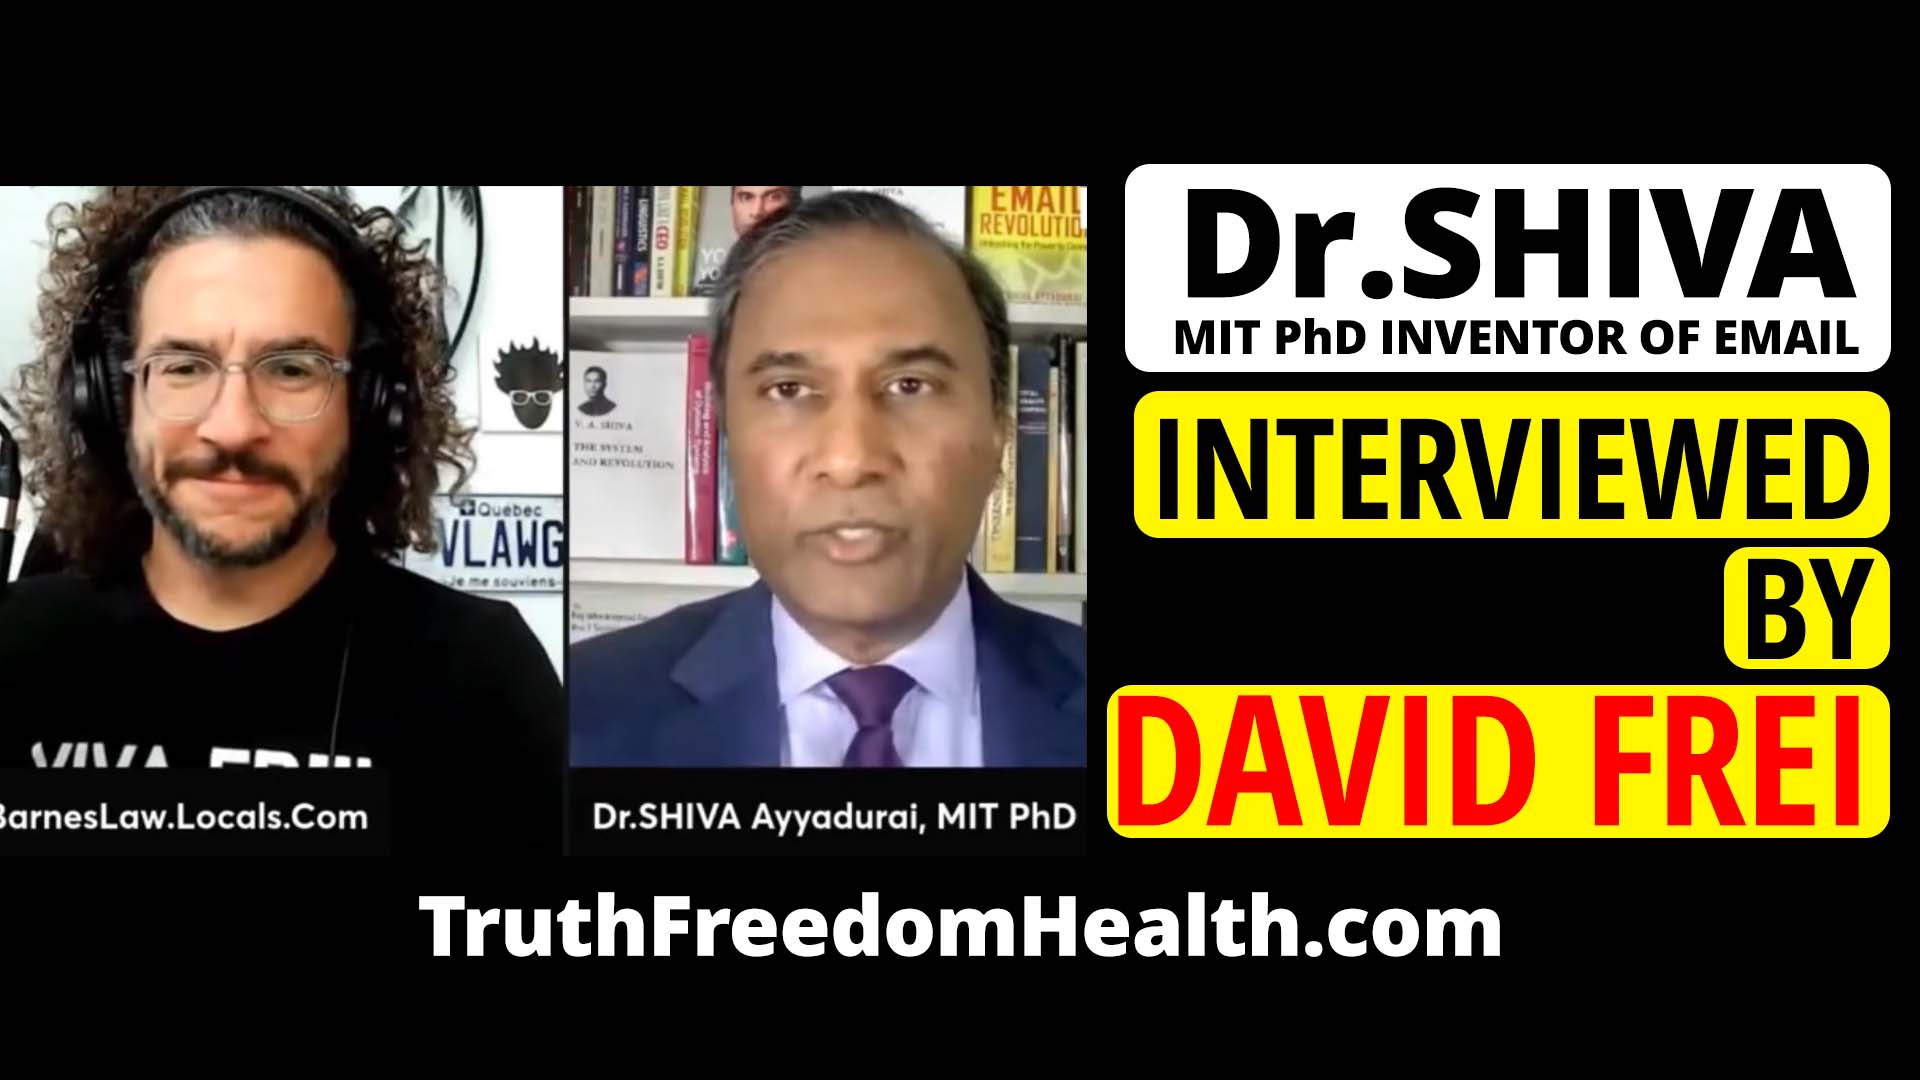 Dr.SHIVA LIVE: Interviewed by David Frei